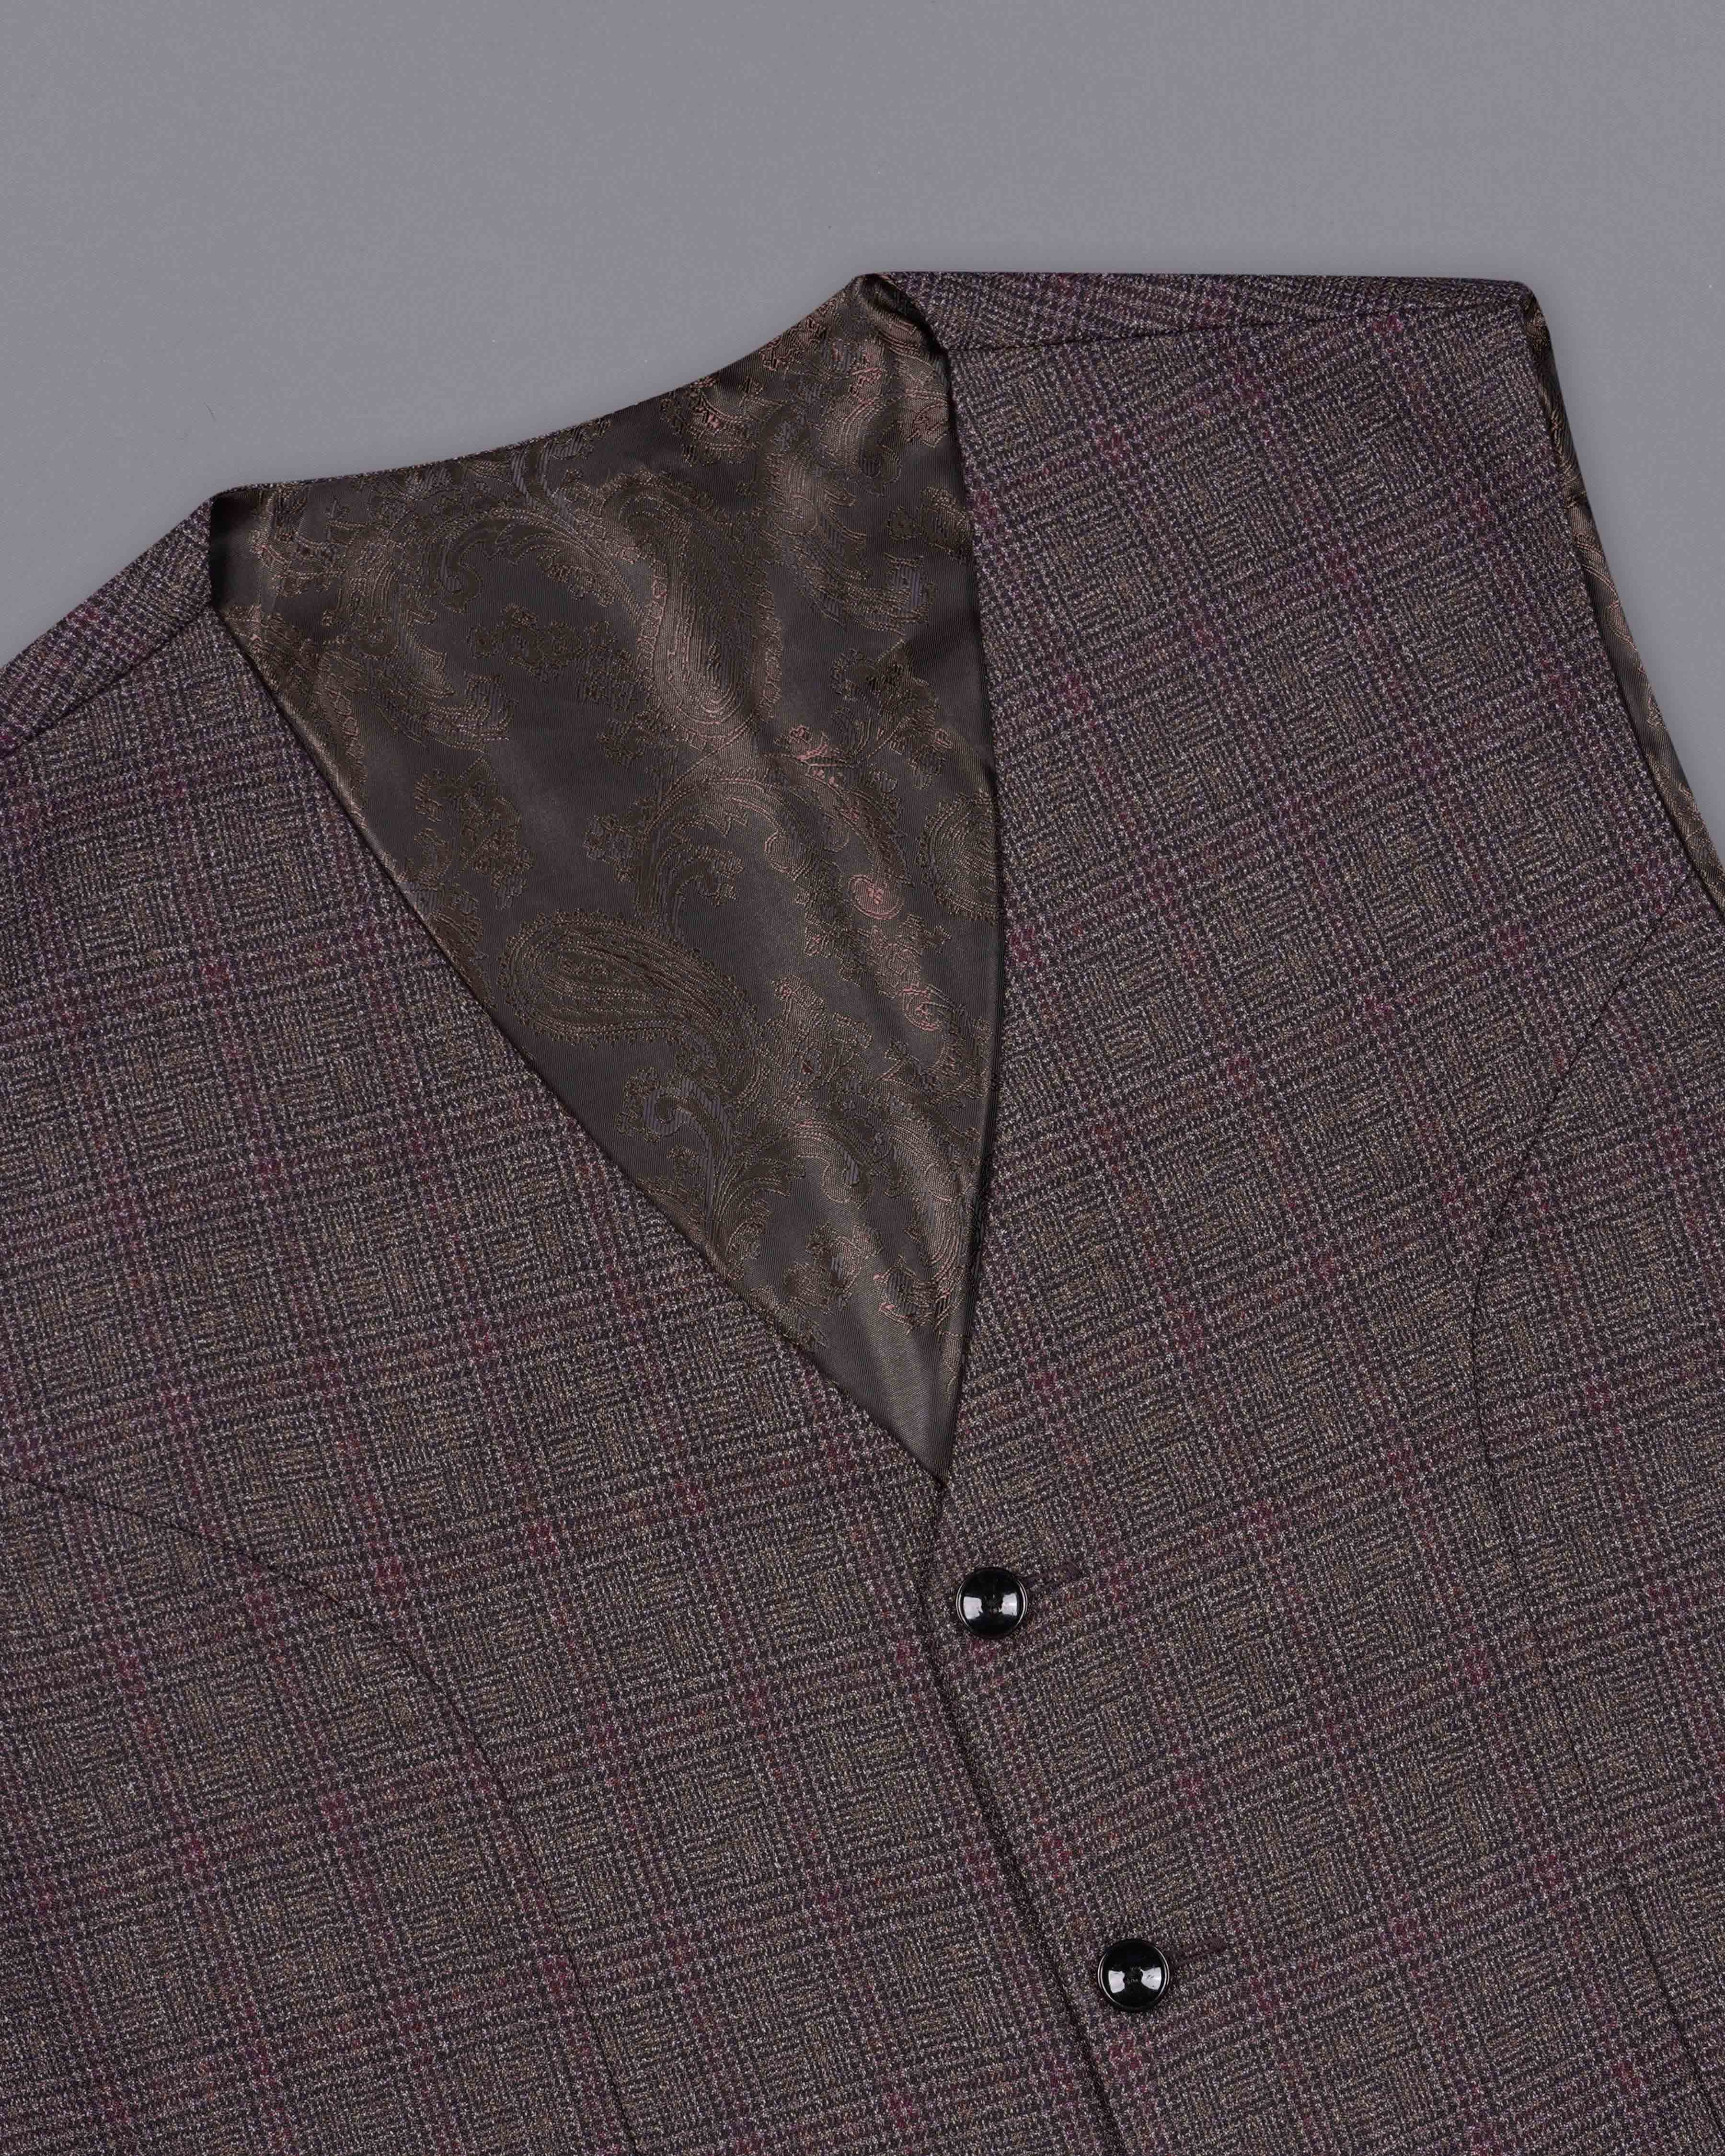 Matterhorn Brown with Maroon Subtle Plaid Double Breasted Suit